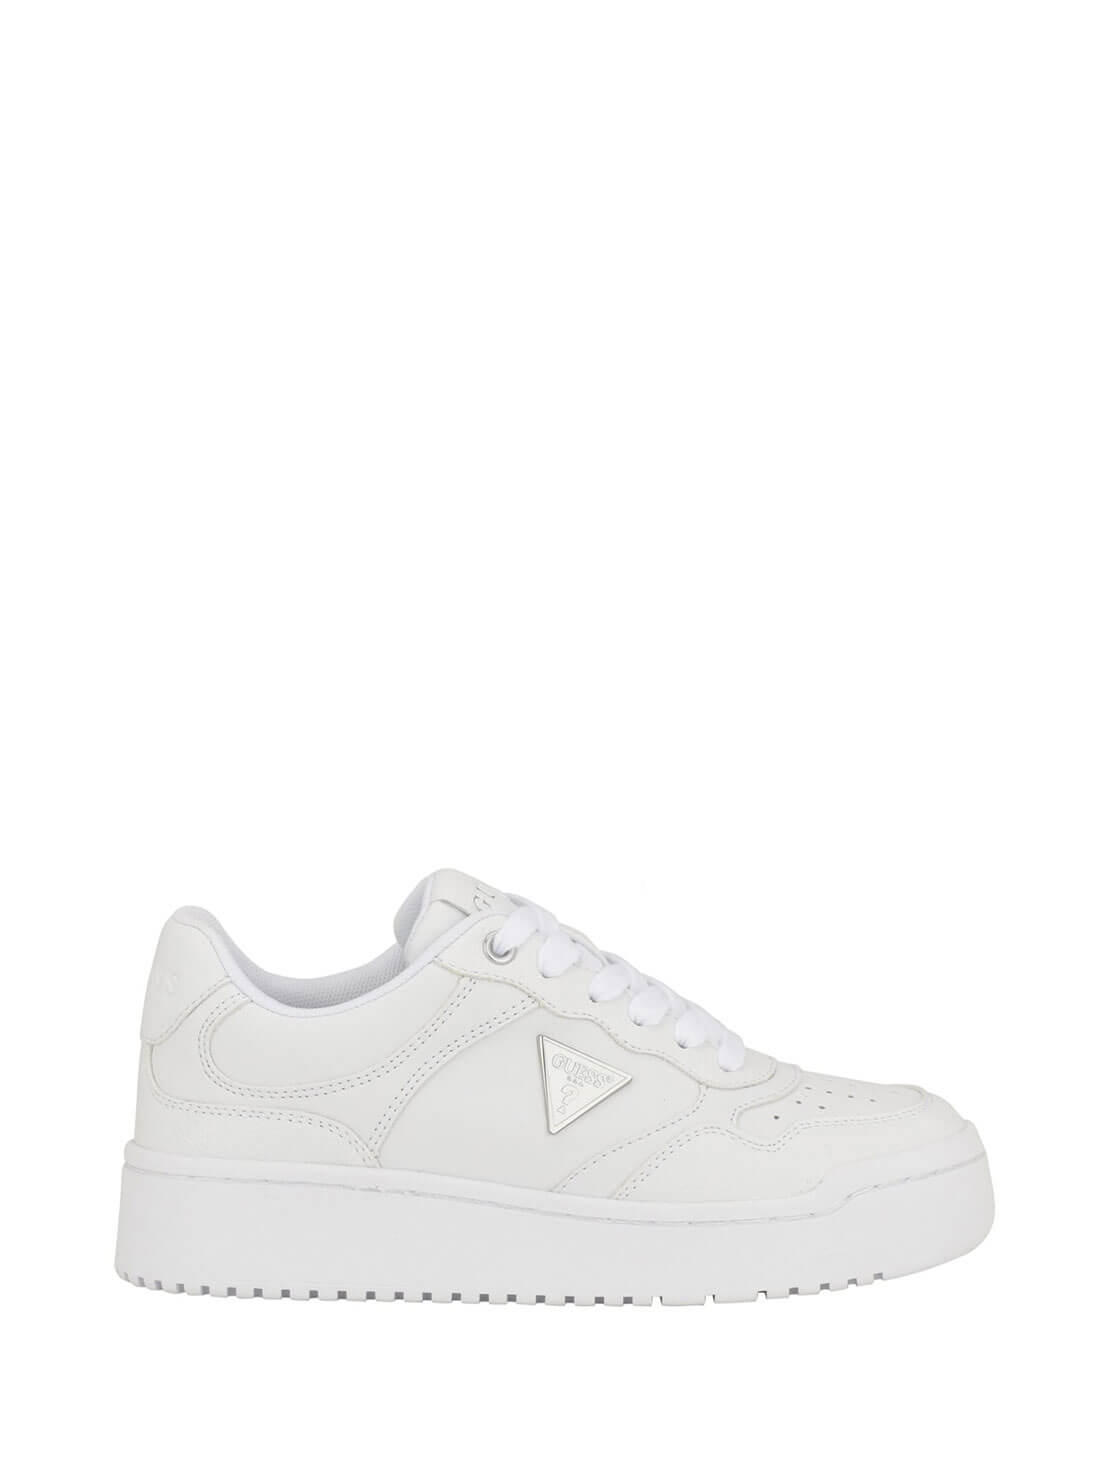 White Miram Sneakers | GUESS Women's Shoes | side view